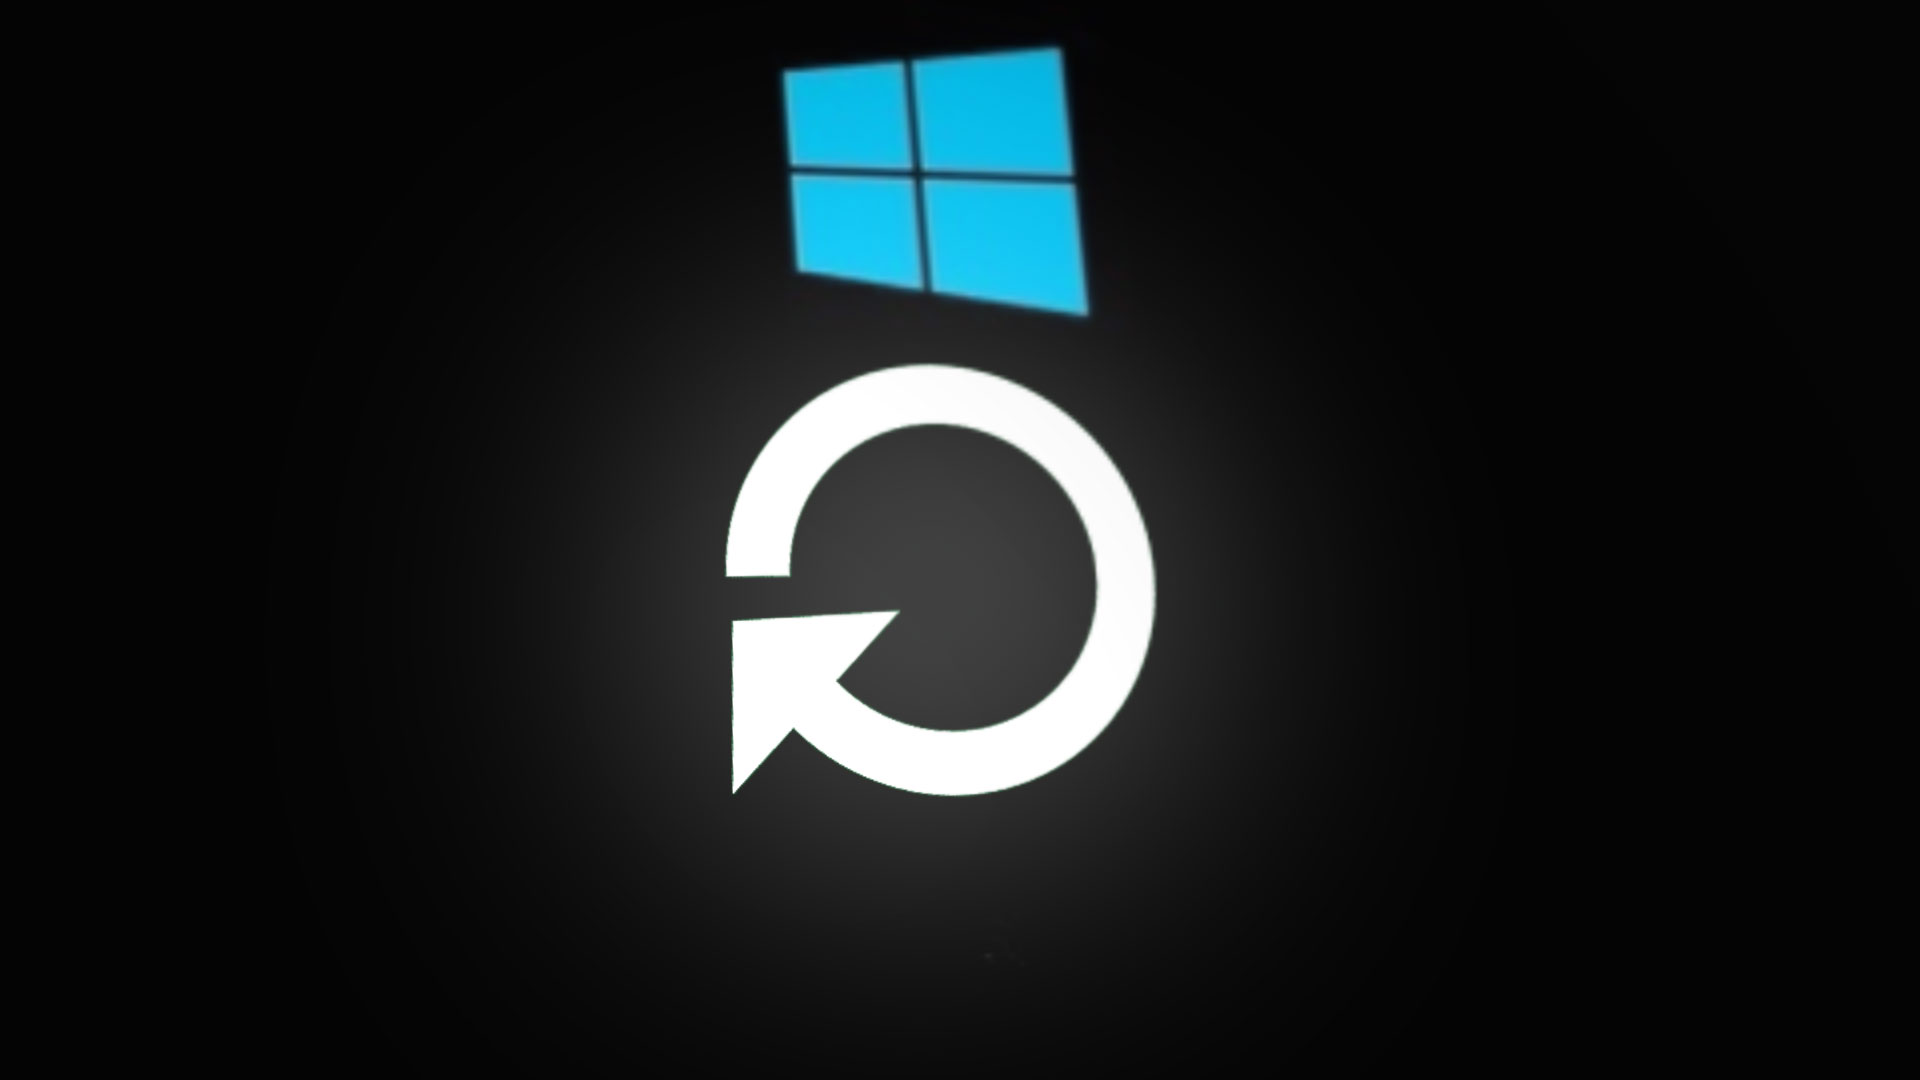 Factory Reset in Windows Stuck At 45%